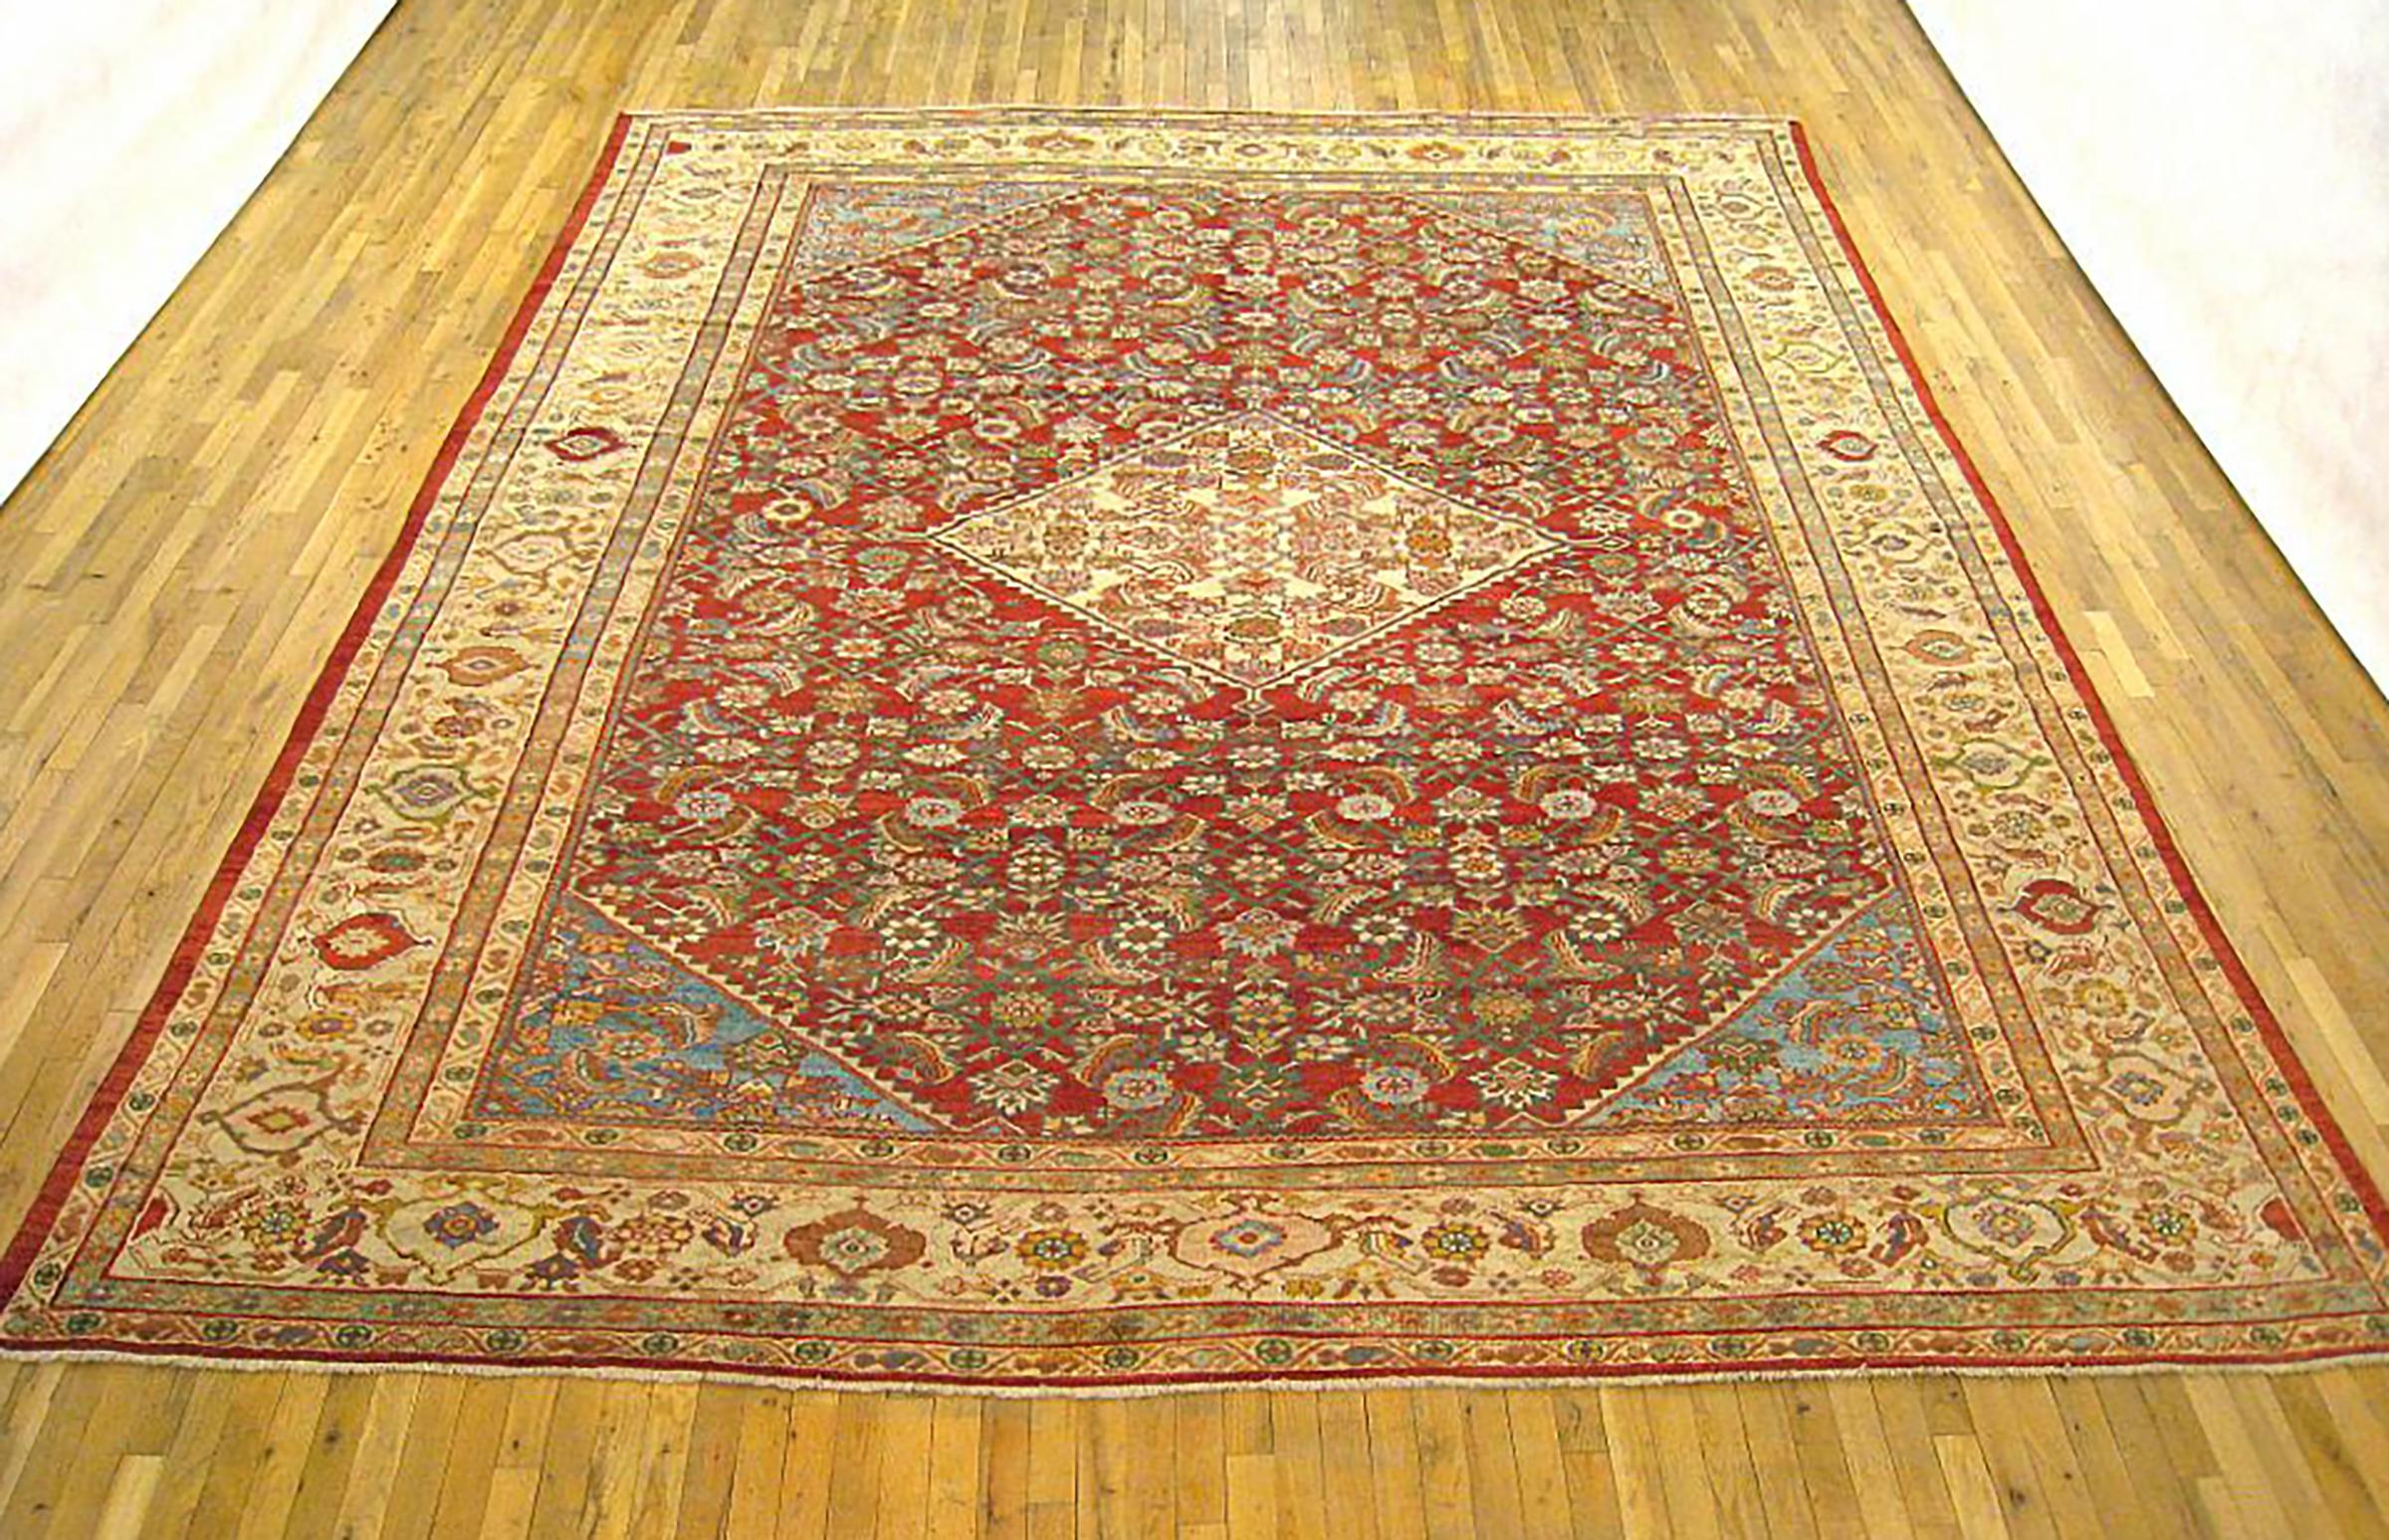 Antique Persian Sultanabad Rug, Room size, circa 1910

A one-of-a-kind antique Persian Sultanabad oriental carpet with a thick and lustrous wool pile, knotted by hand, with soft touch and great resistance to wear. This carpet features a central